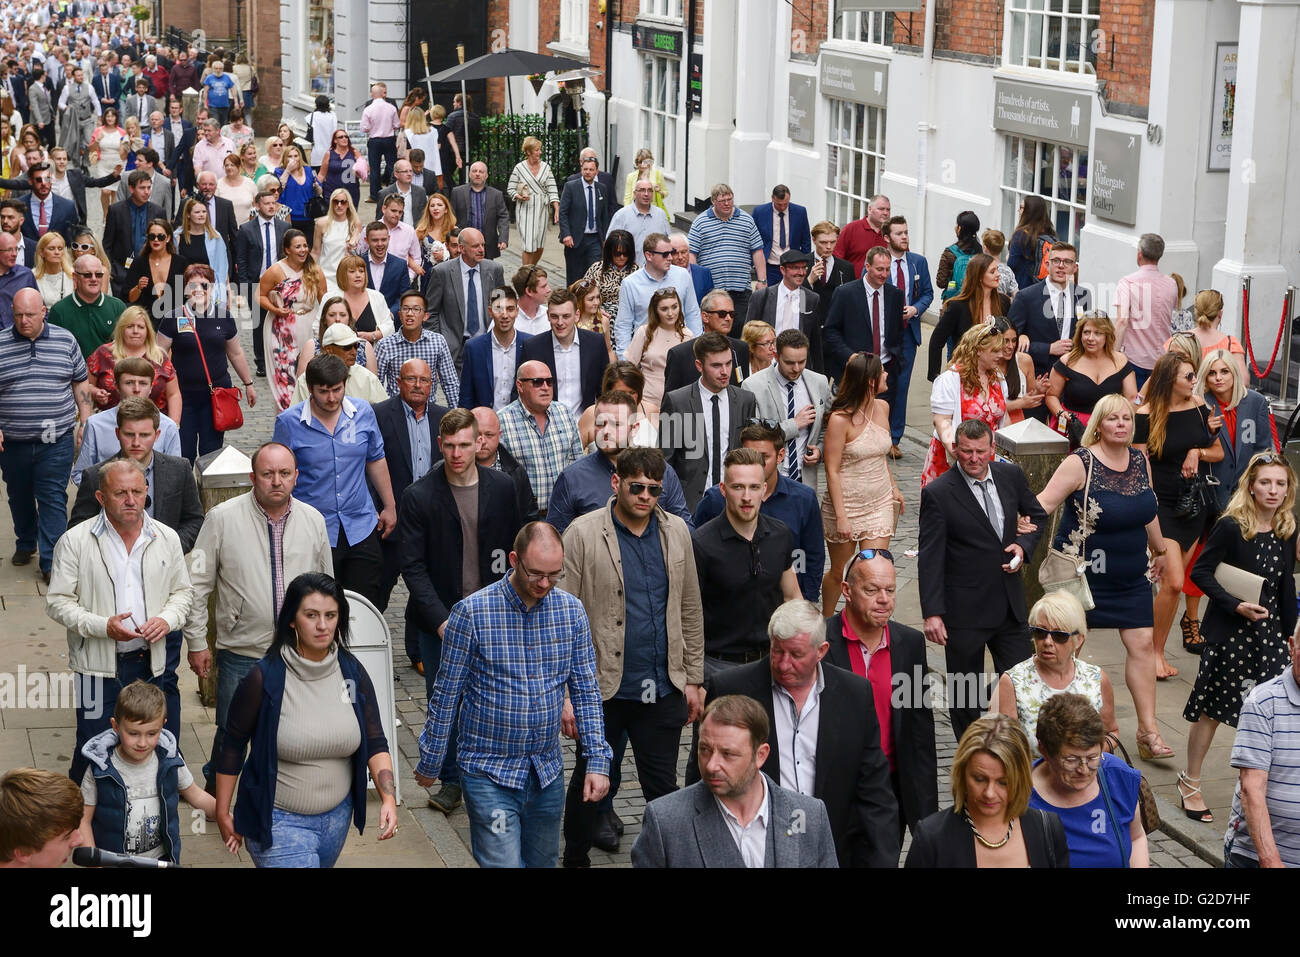 Chester Races, Chester, UK. 28th May 2016. After the final race of the meeting, racegoers make the short walk from the racecourse towards the pubs, bars and restaurants on Watergate Street in Chester city centre. Andrew Paterson/ Alamy Live News. Stock Photo